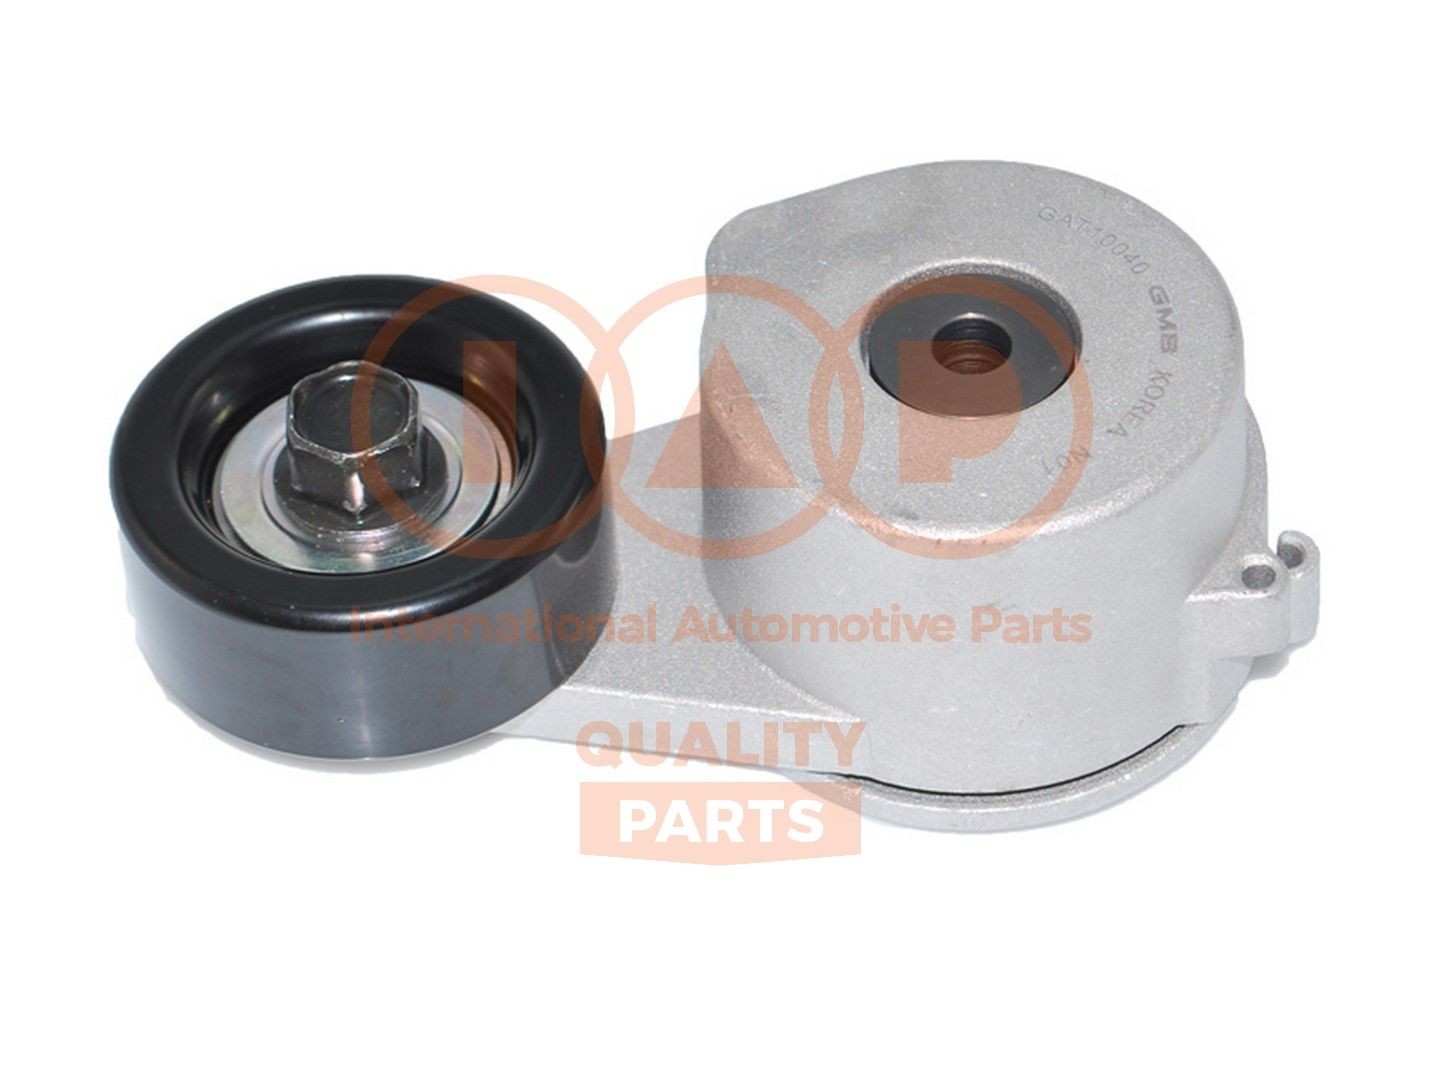 IAP QUALITY PARTS 127-07002 Tensioner pulley 25281-2F-001